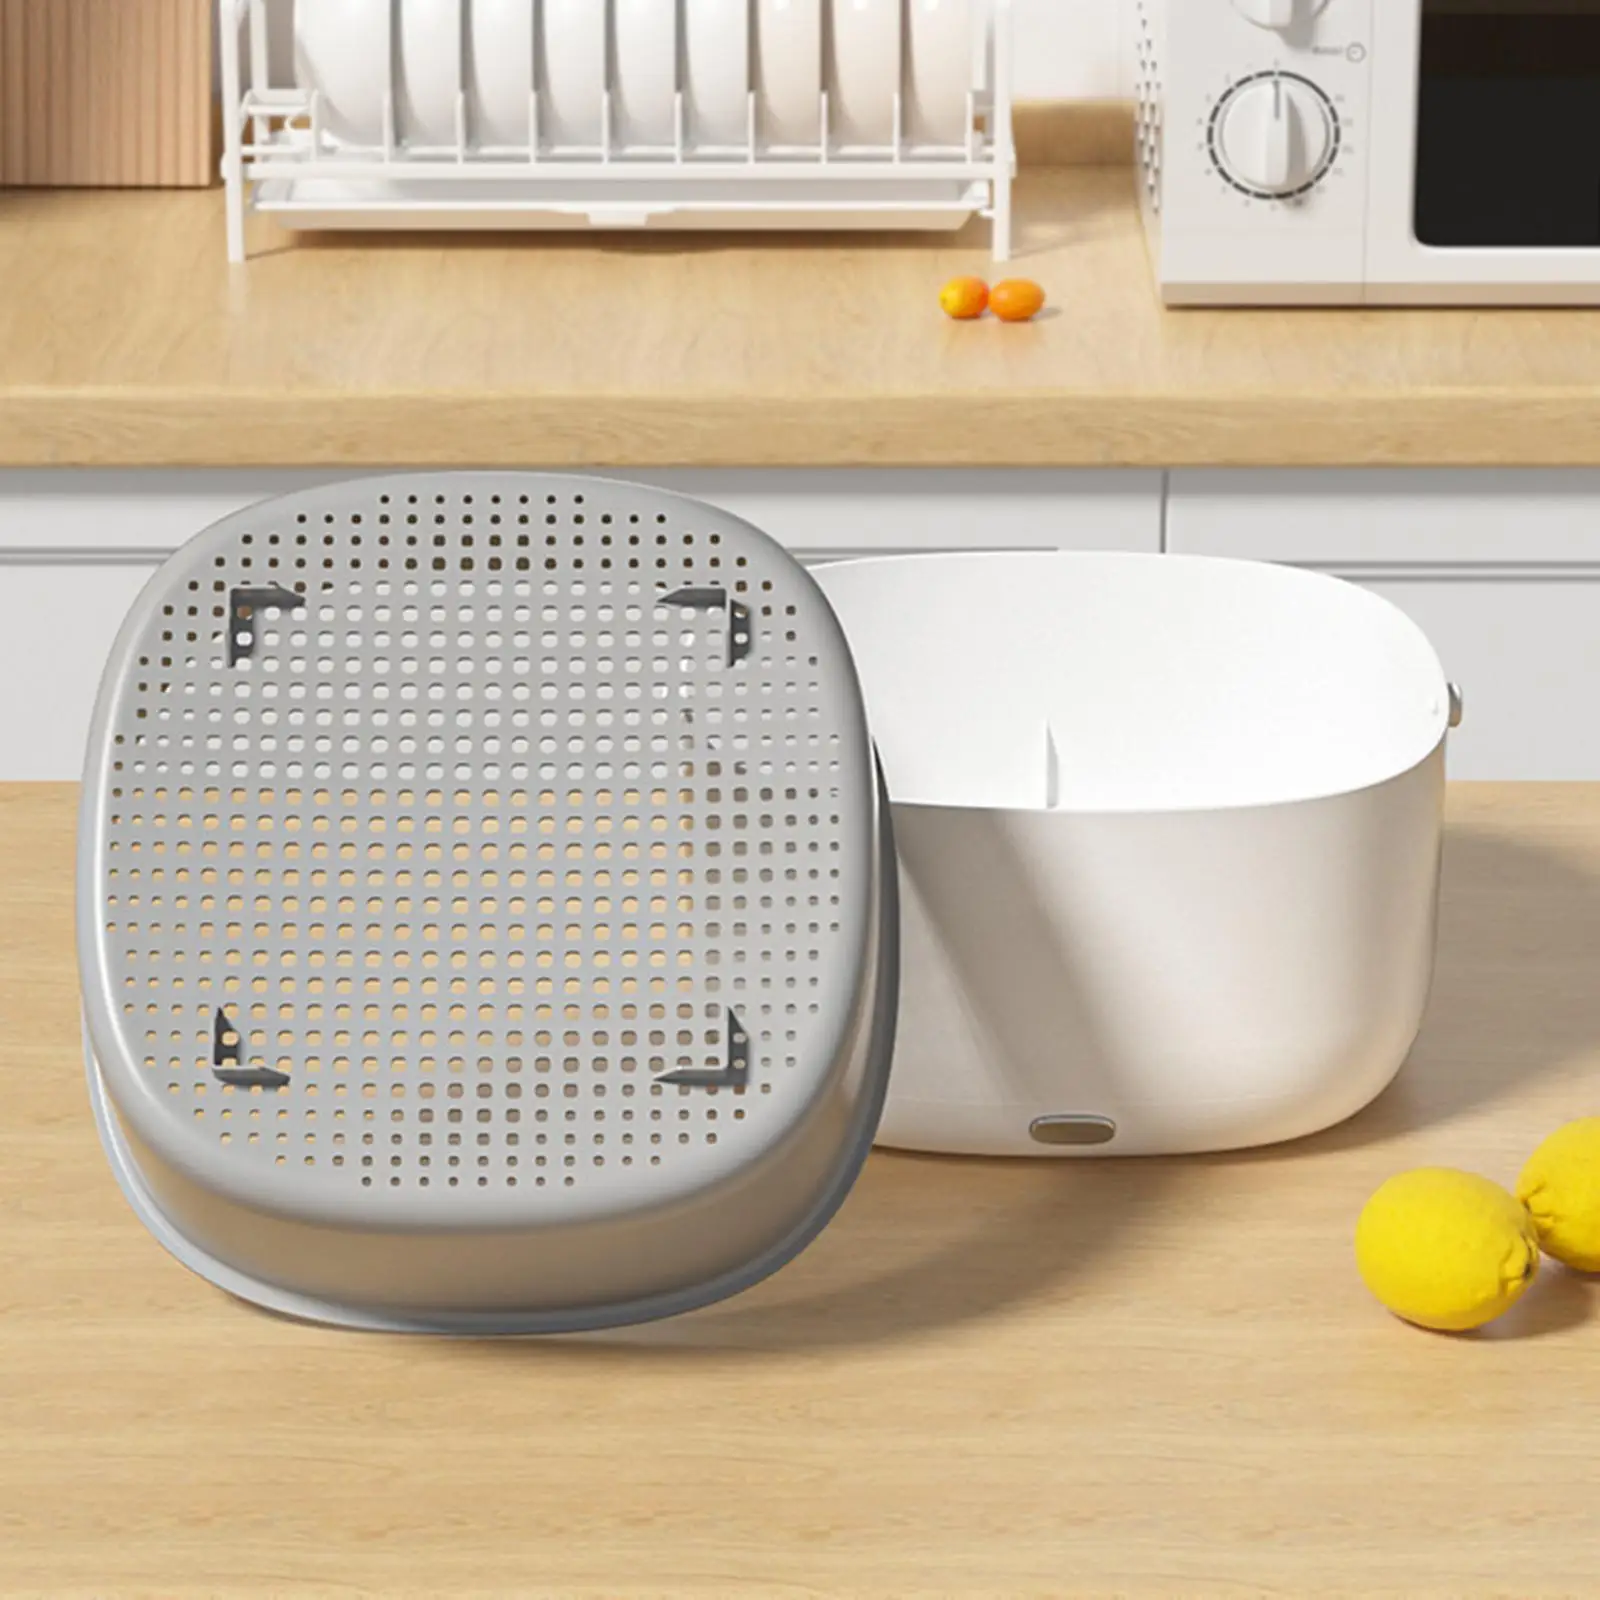 Automatic Electric Kitchen Colander Drain Basket Self Cleaning Washing Mixing Basket Bowls Household Strainer Drain Baskets